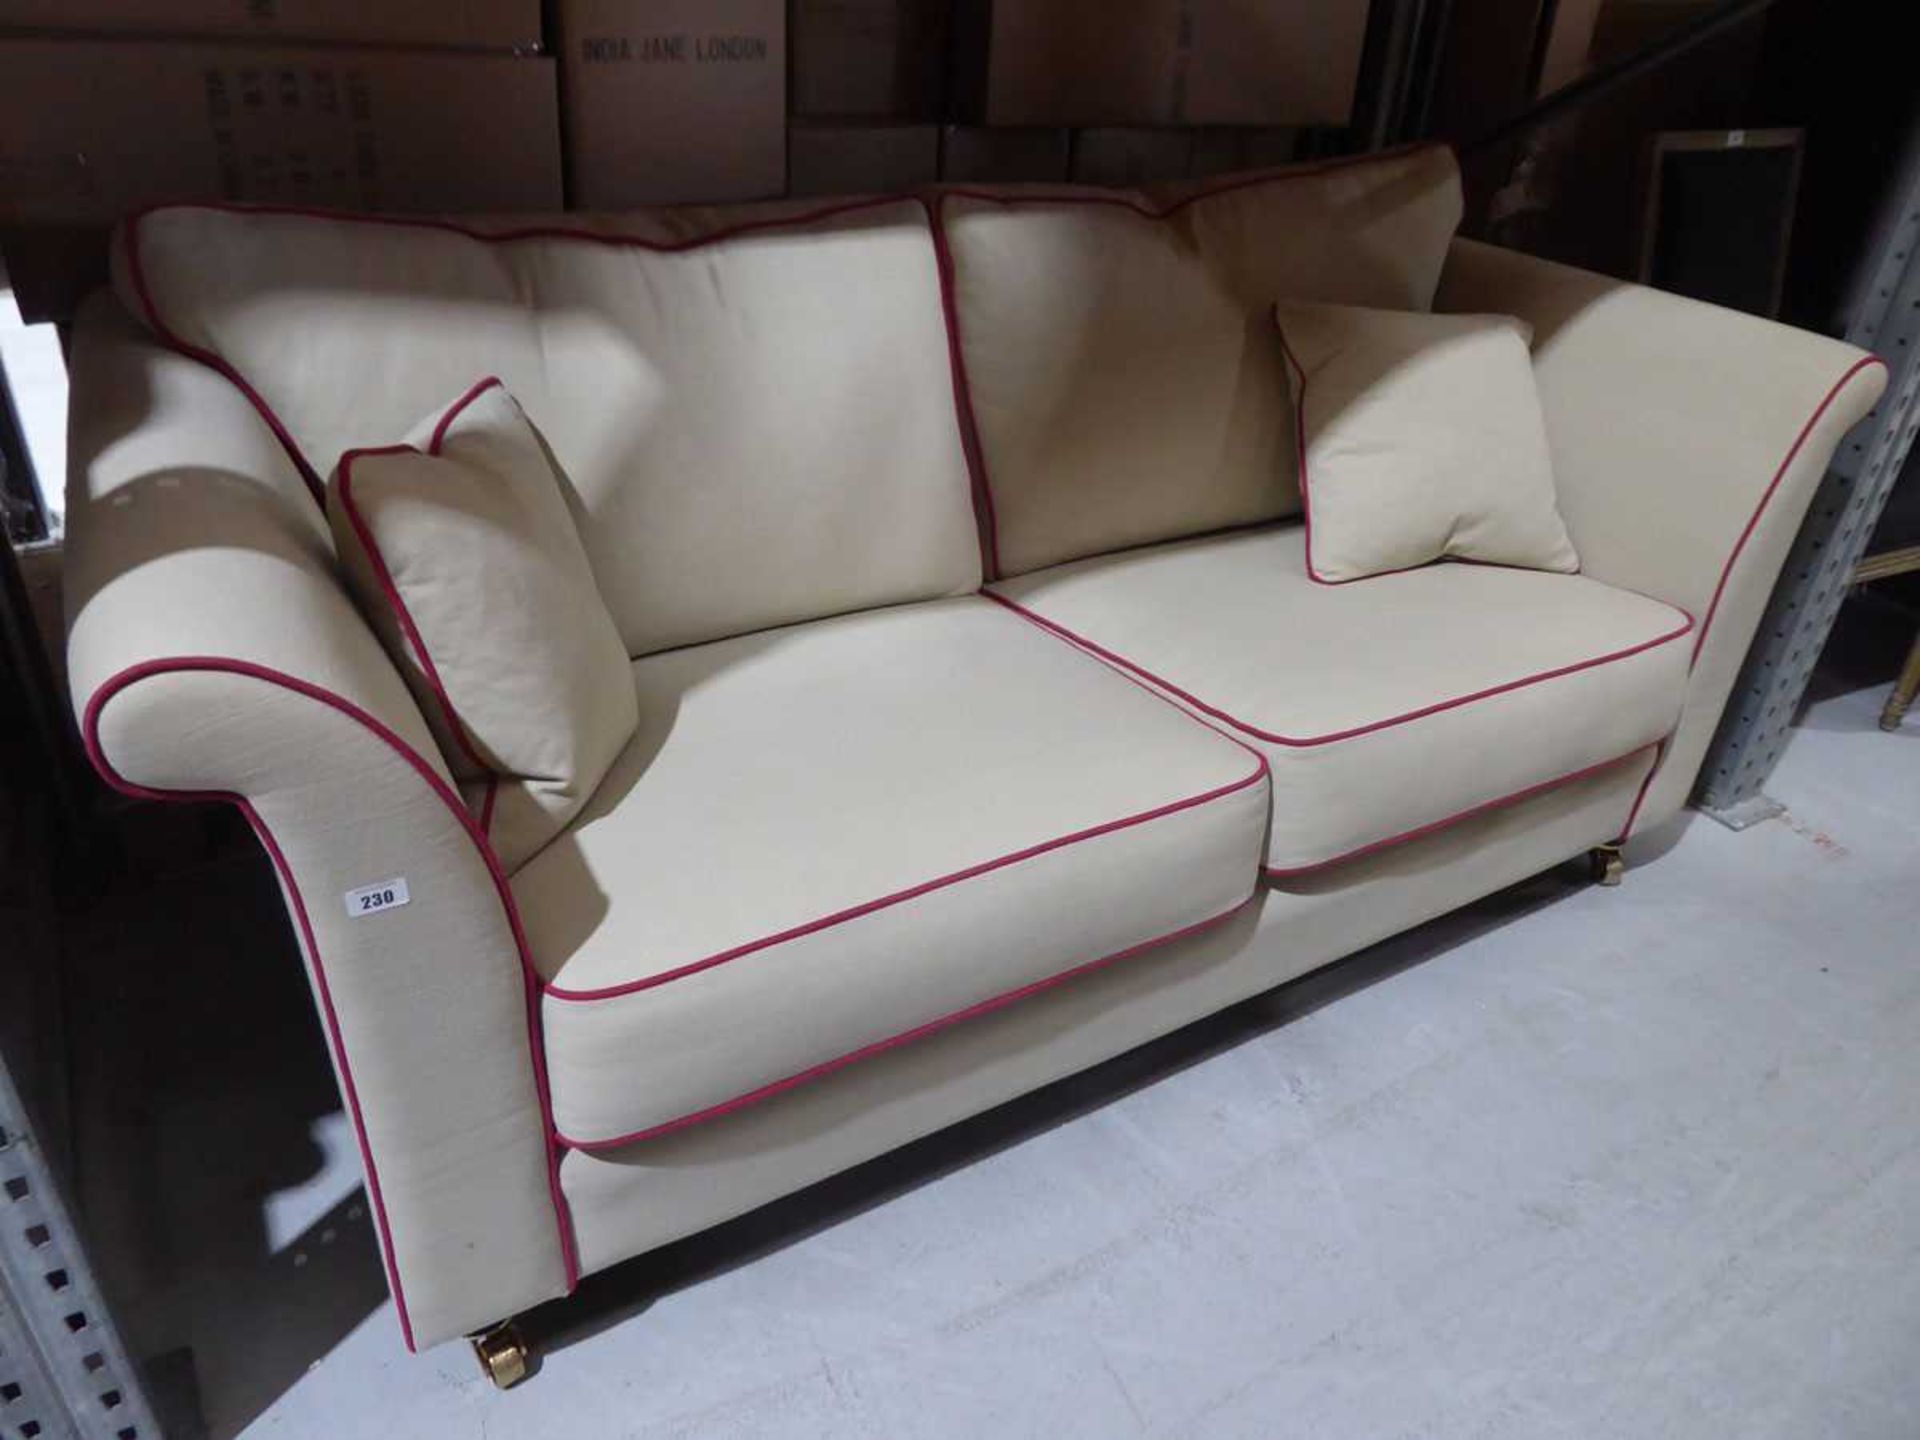 +VAT 2 seater sofa in oatmeal hessian material with red piping and 2 scatter cushions 200 x 94 x